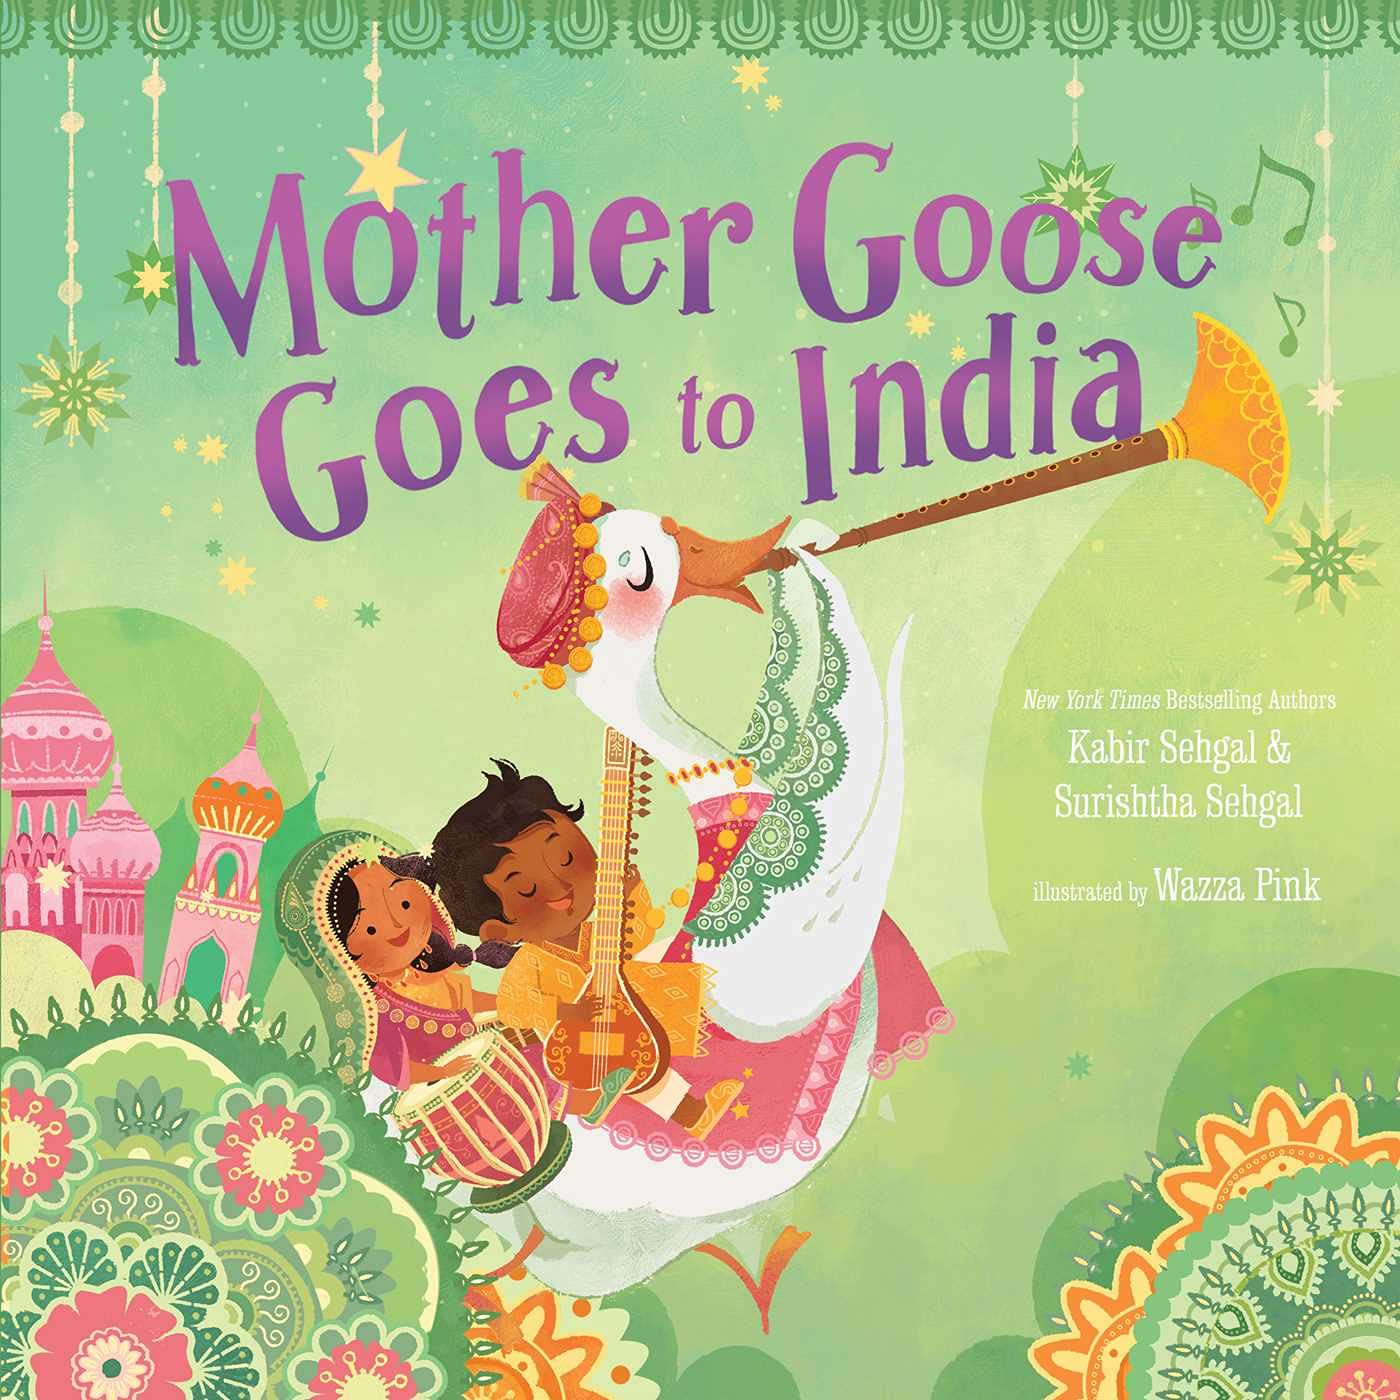 Cover for "Mother Goose Goes to India"